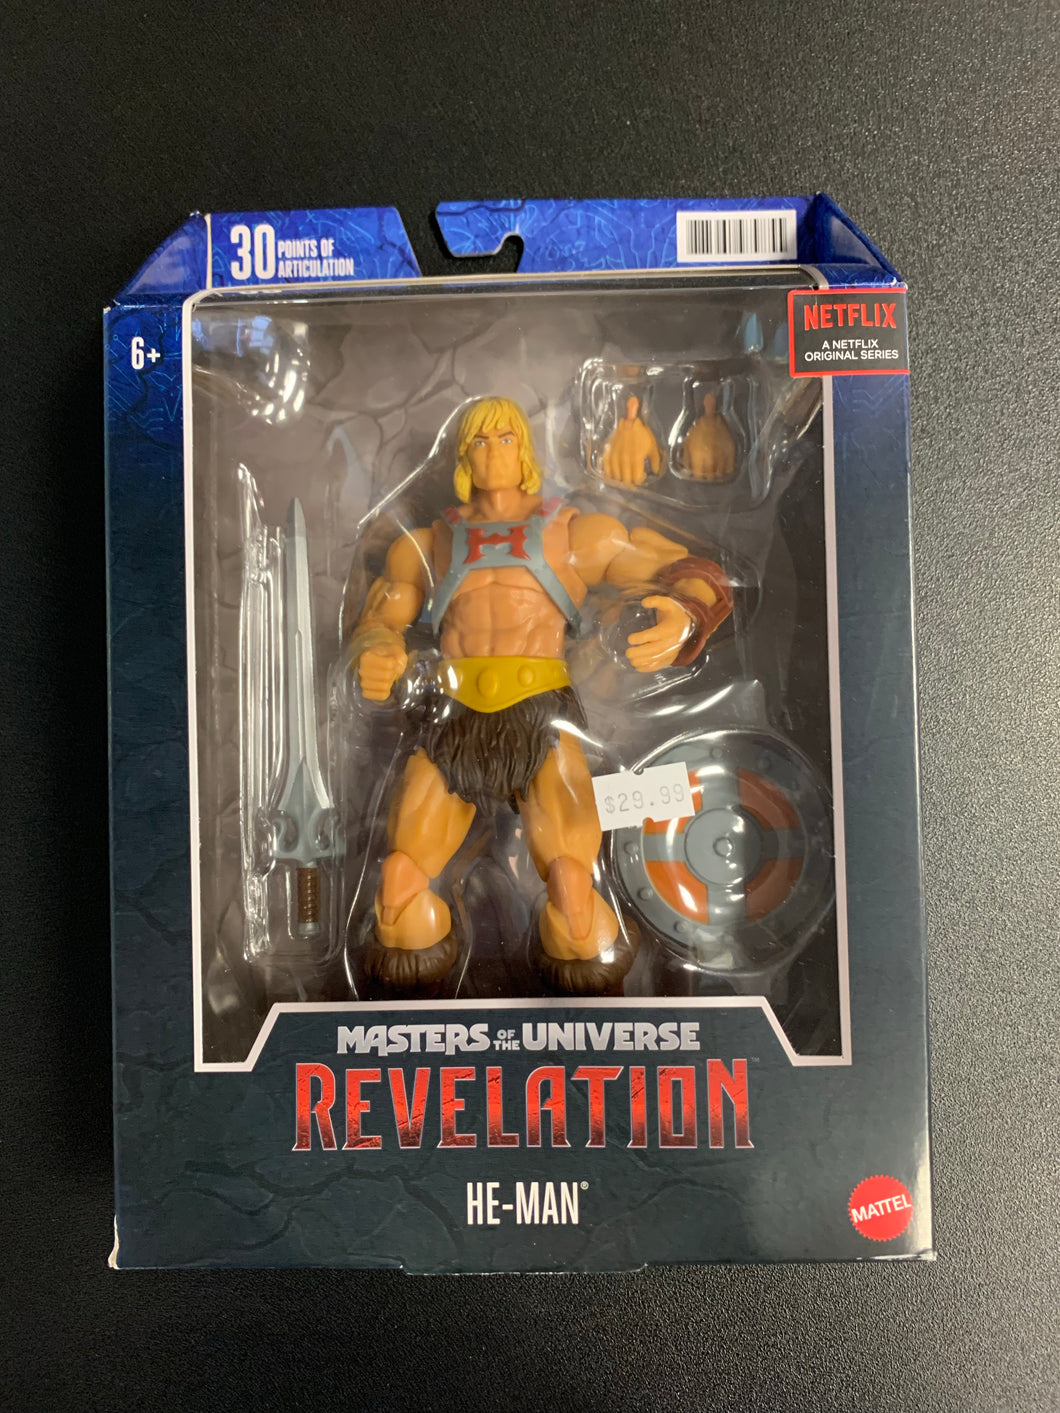 MASTERS OF THE UNIVERSE REVELATION HE-MAN